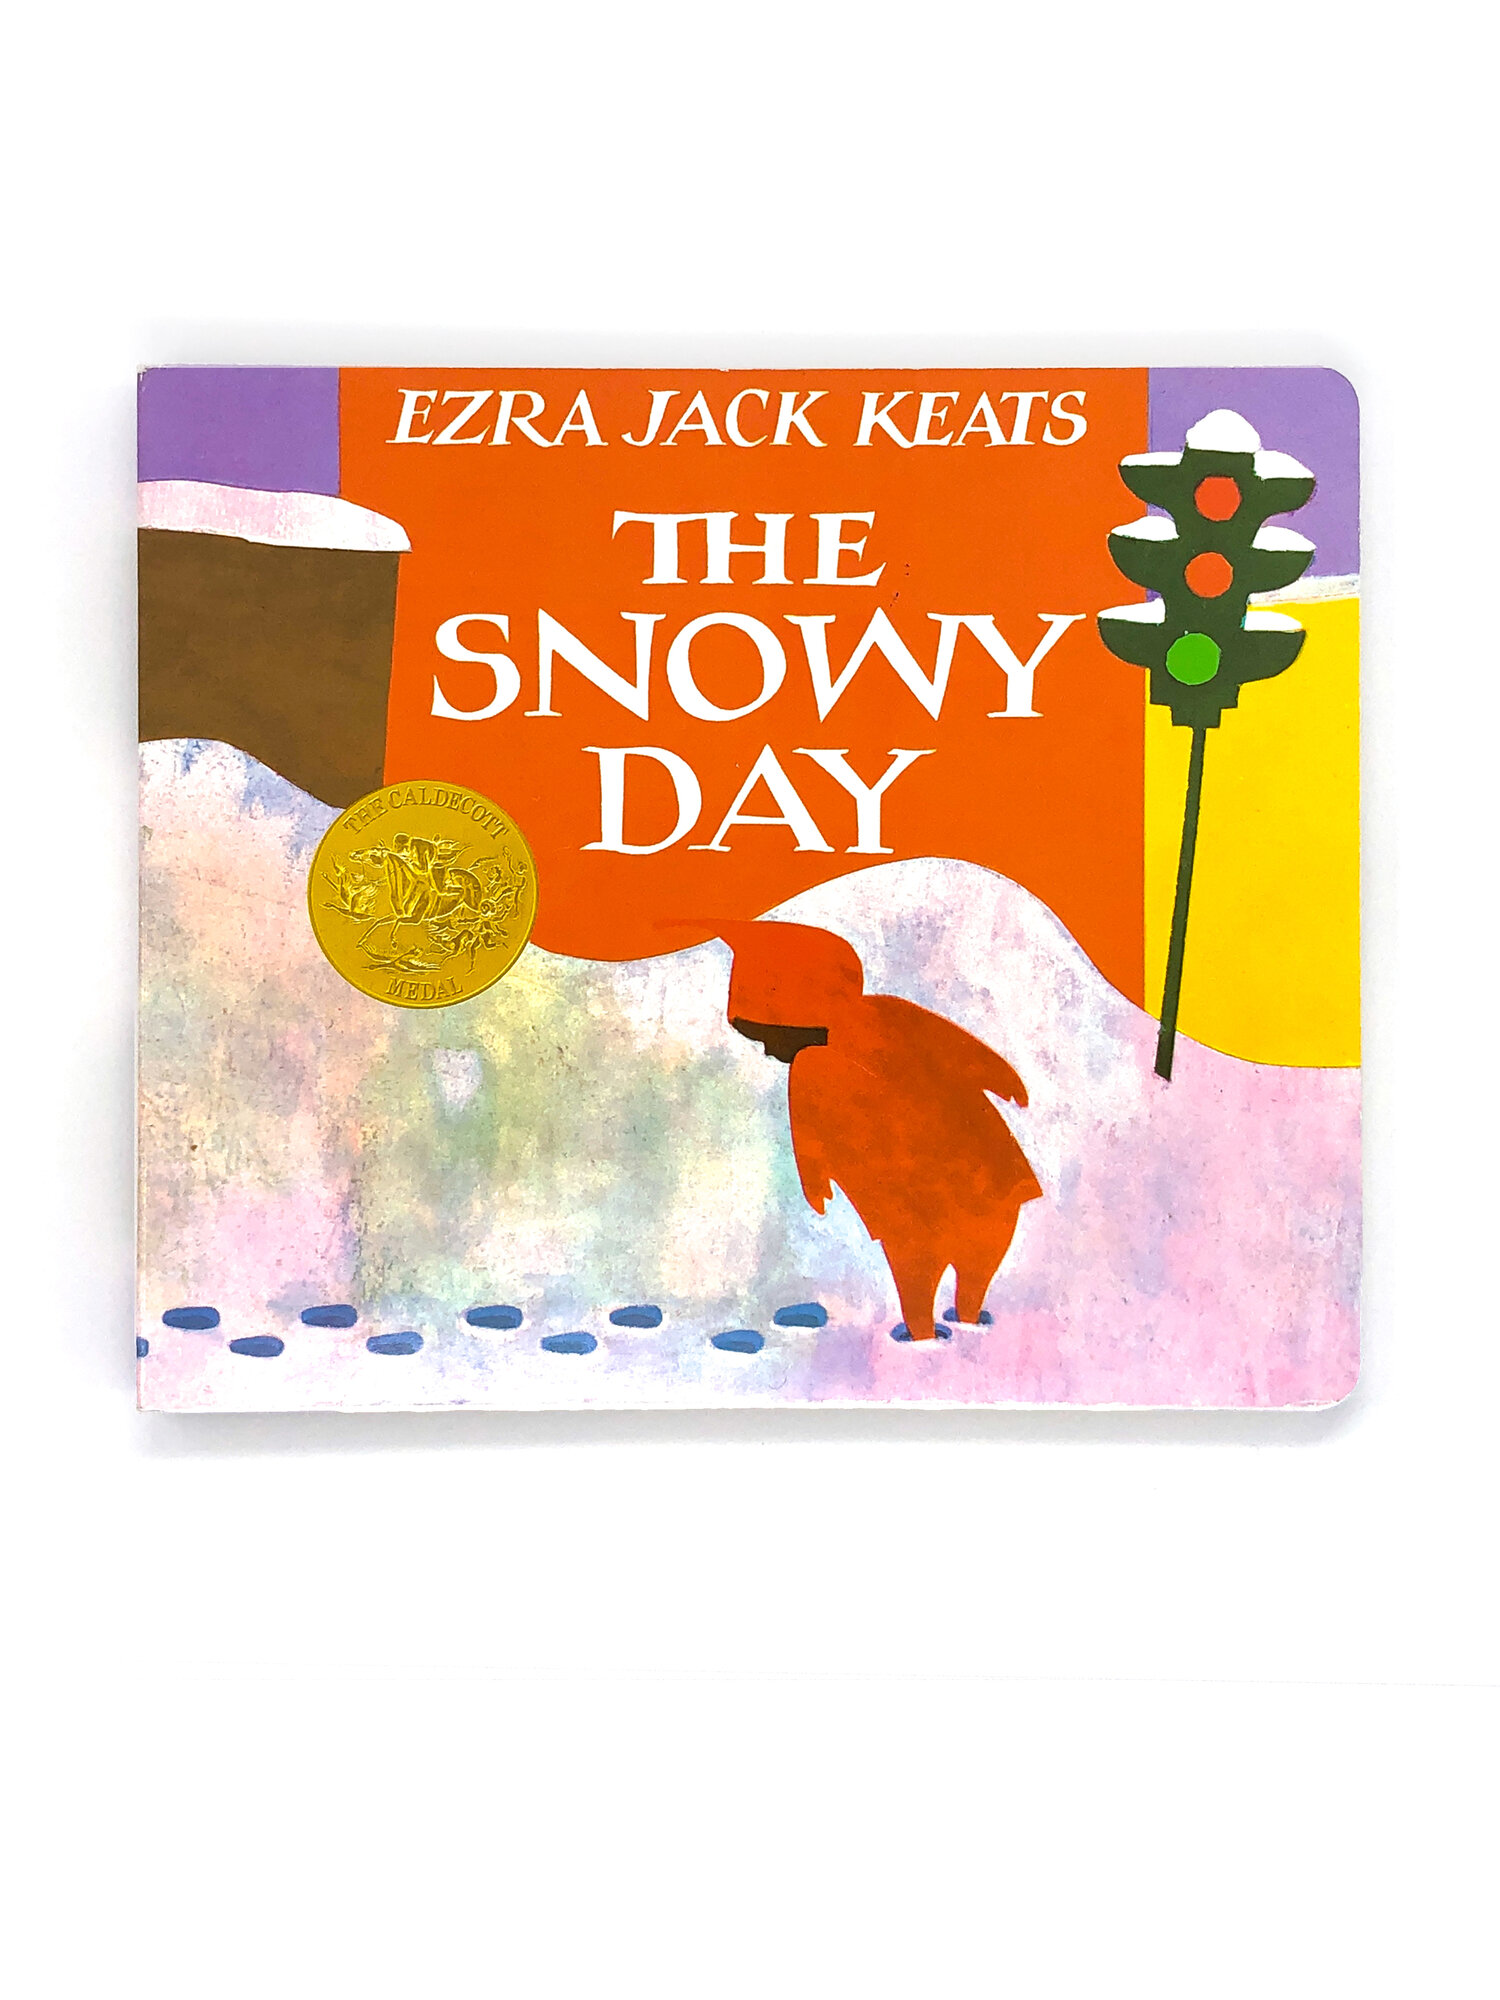 The Snowy Day by Ezra Jack Keats — Steller Handcrafted Goods